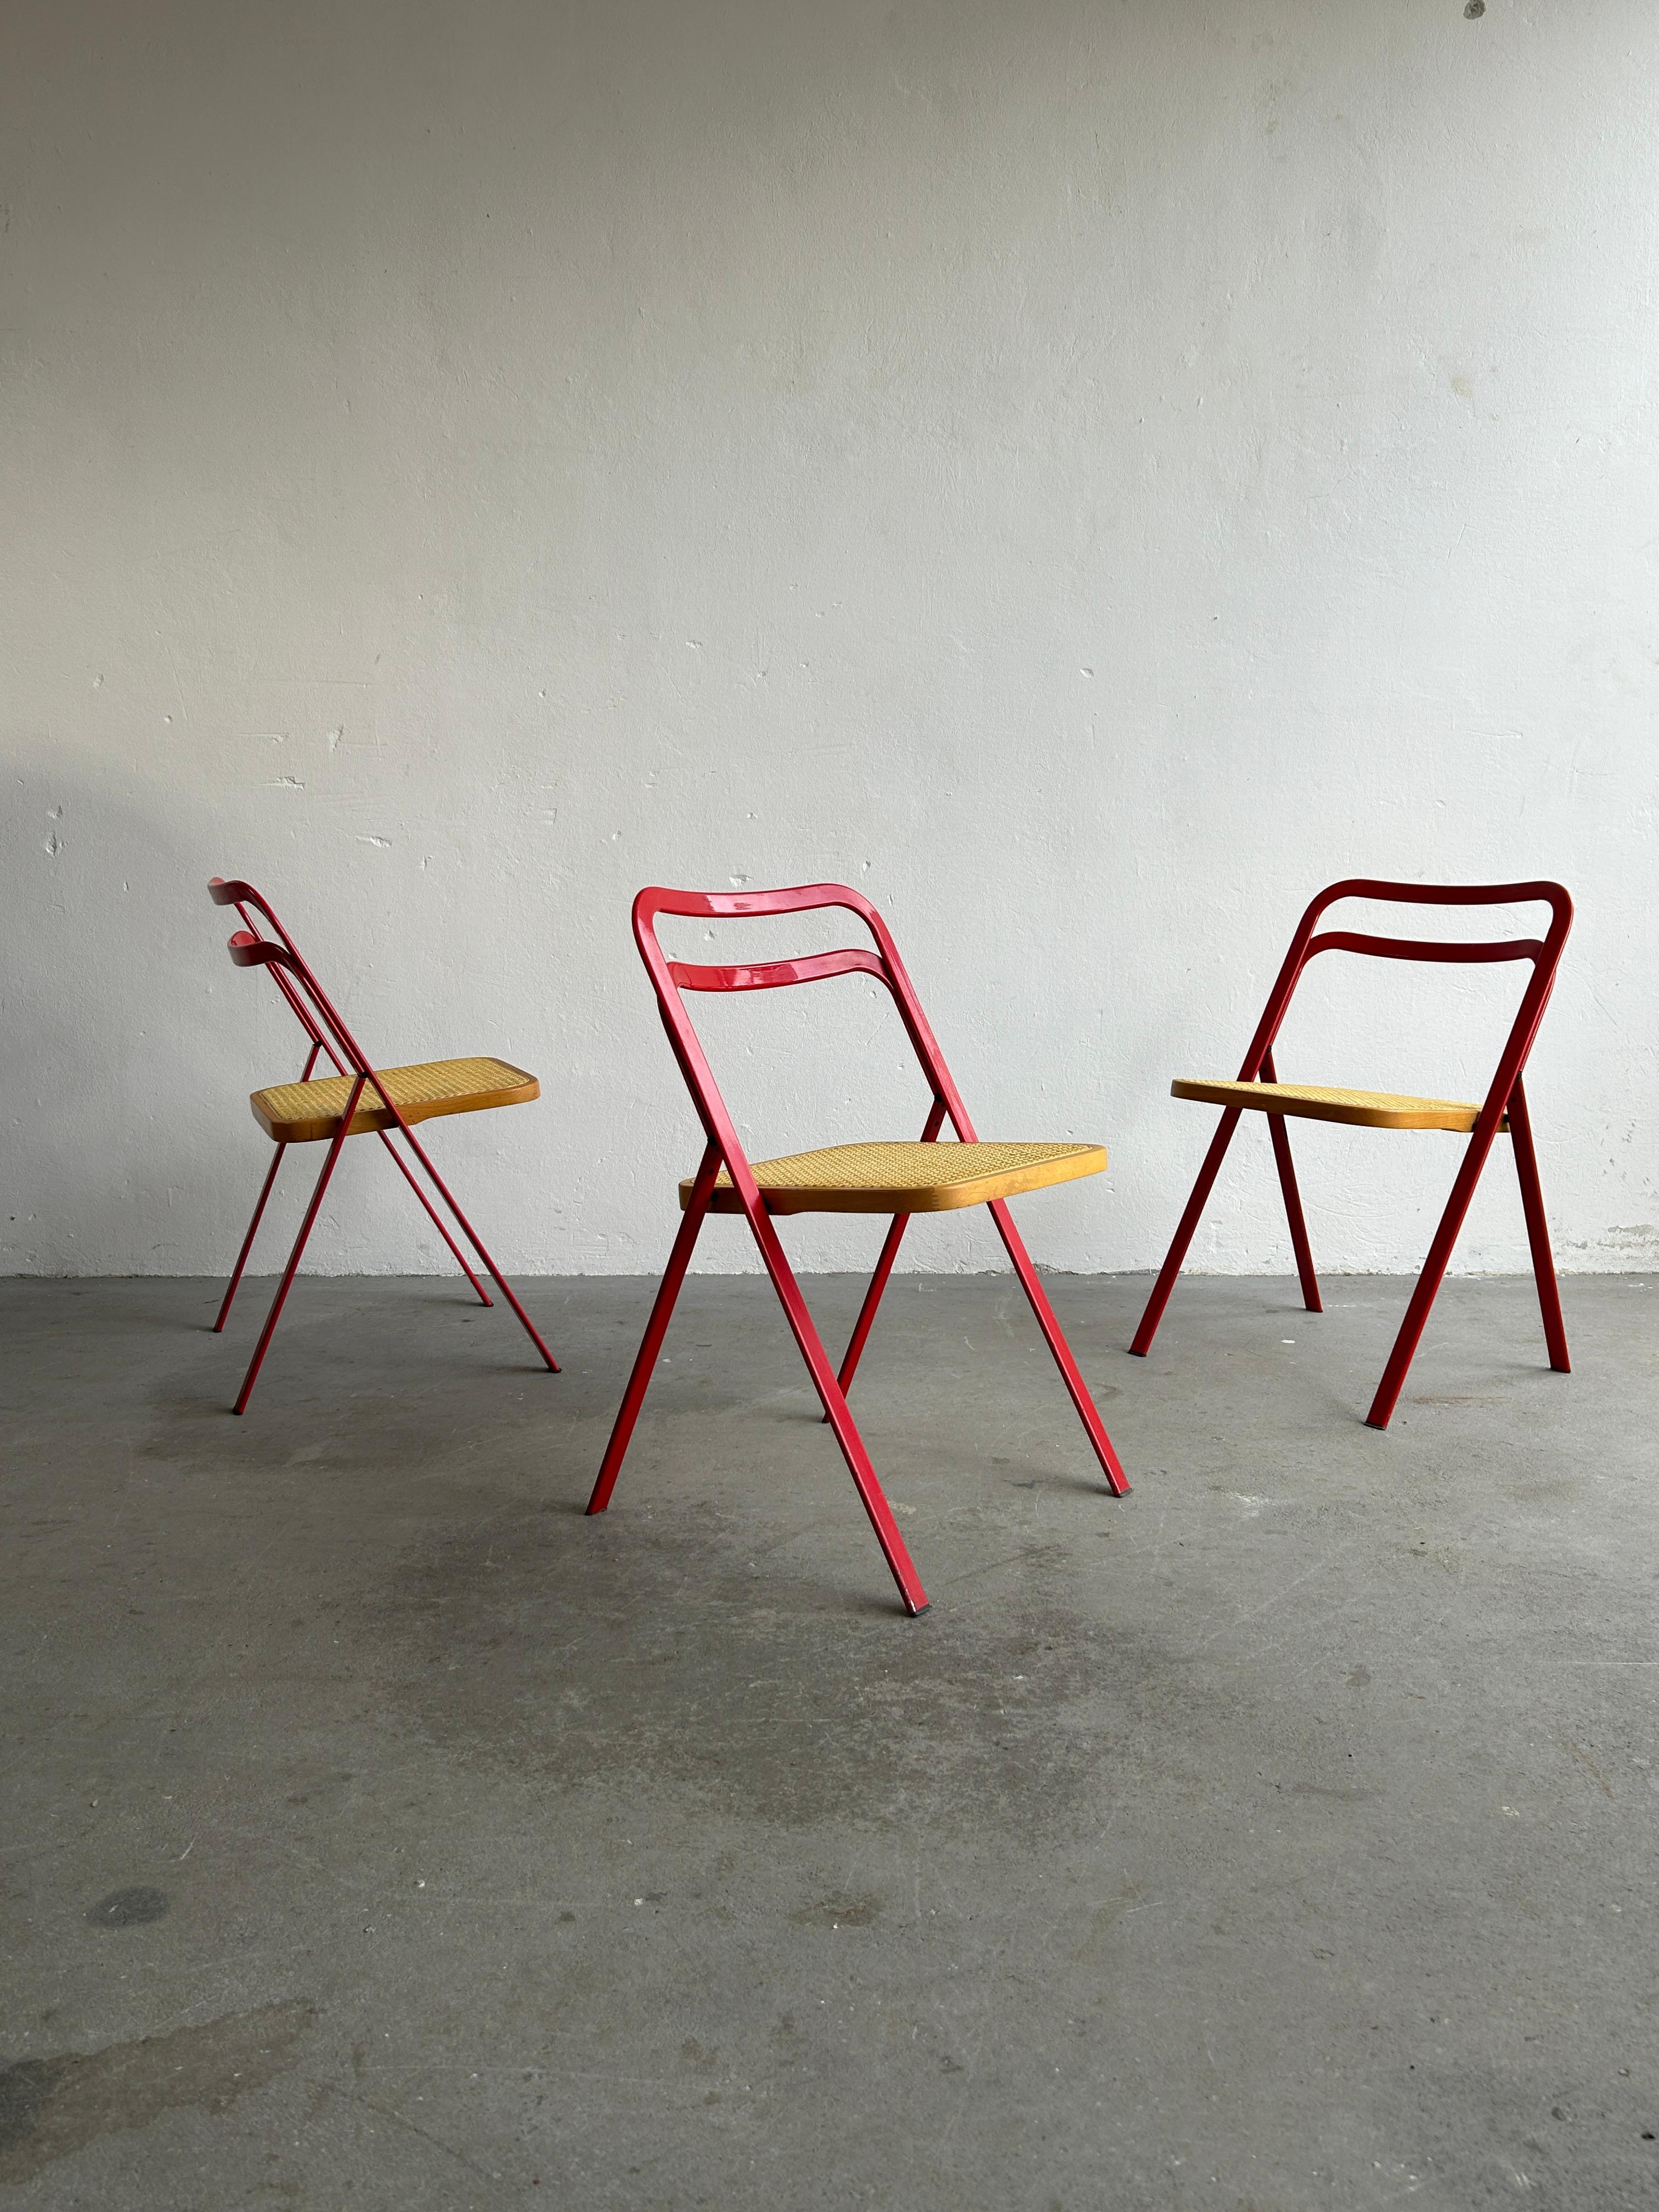 Set of 3 vintage folding dining chairs by CIDUE, designed by Giorgio Cattelan. They are made of steel frame lacquered in red colour with Vienna straw seats. Produced during the 1980s in Italy.
Modernist minimal Italian design.

Completely